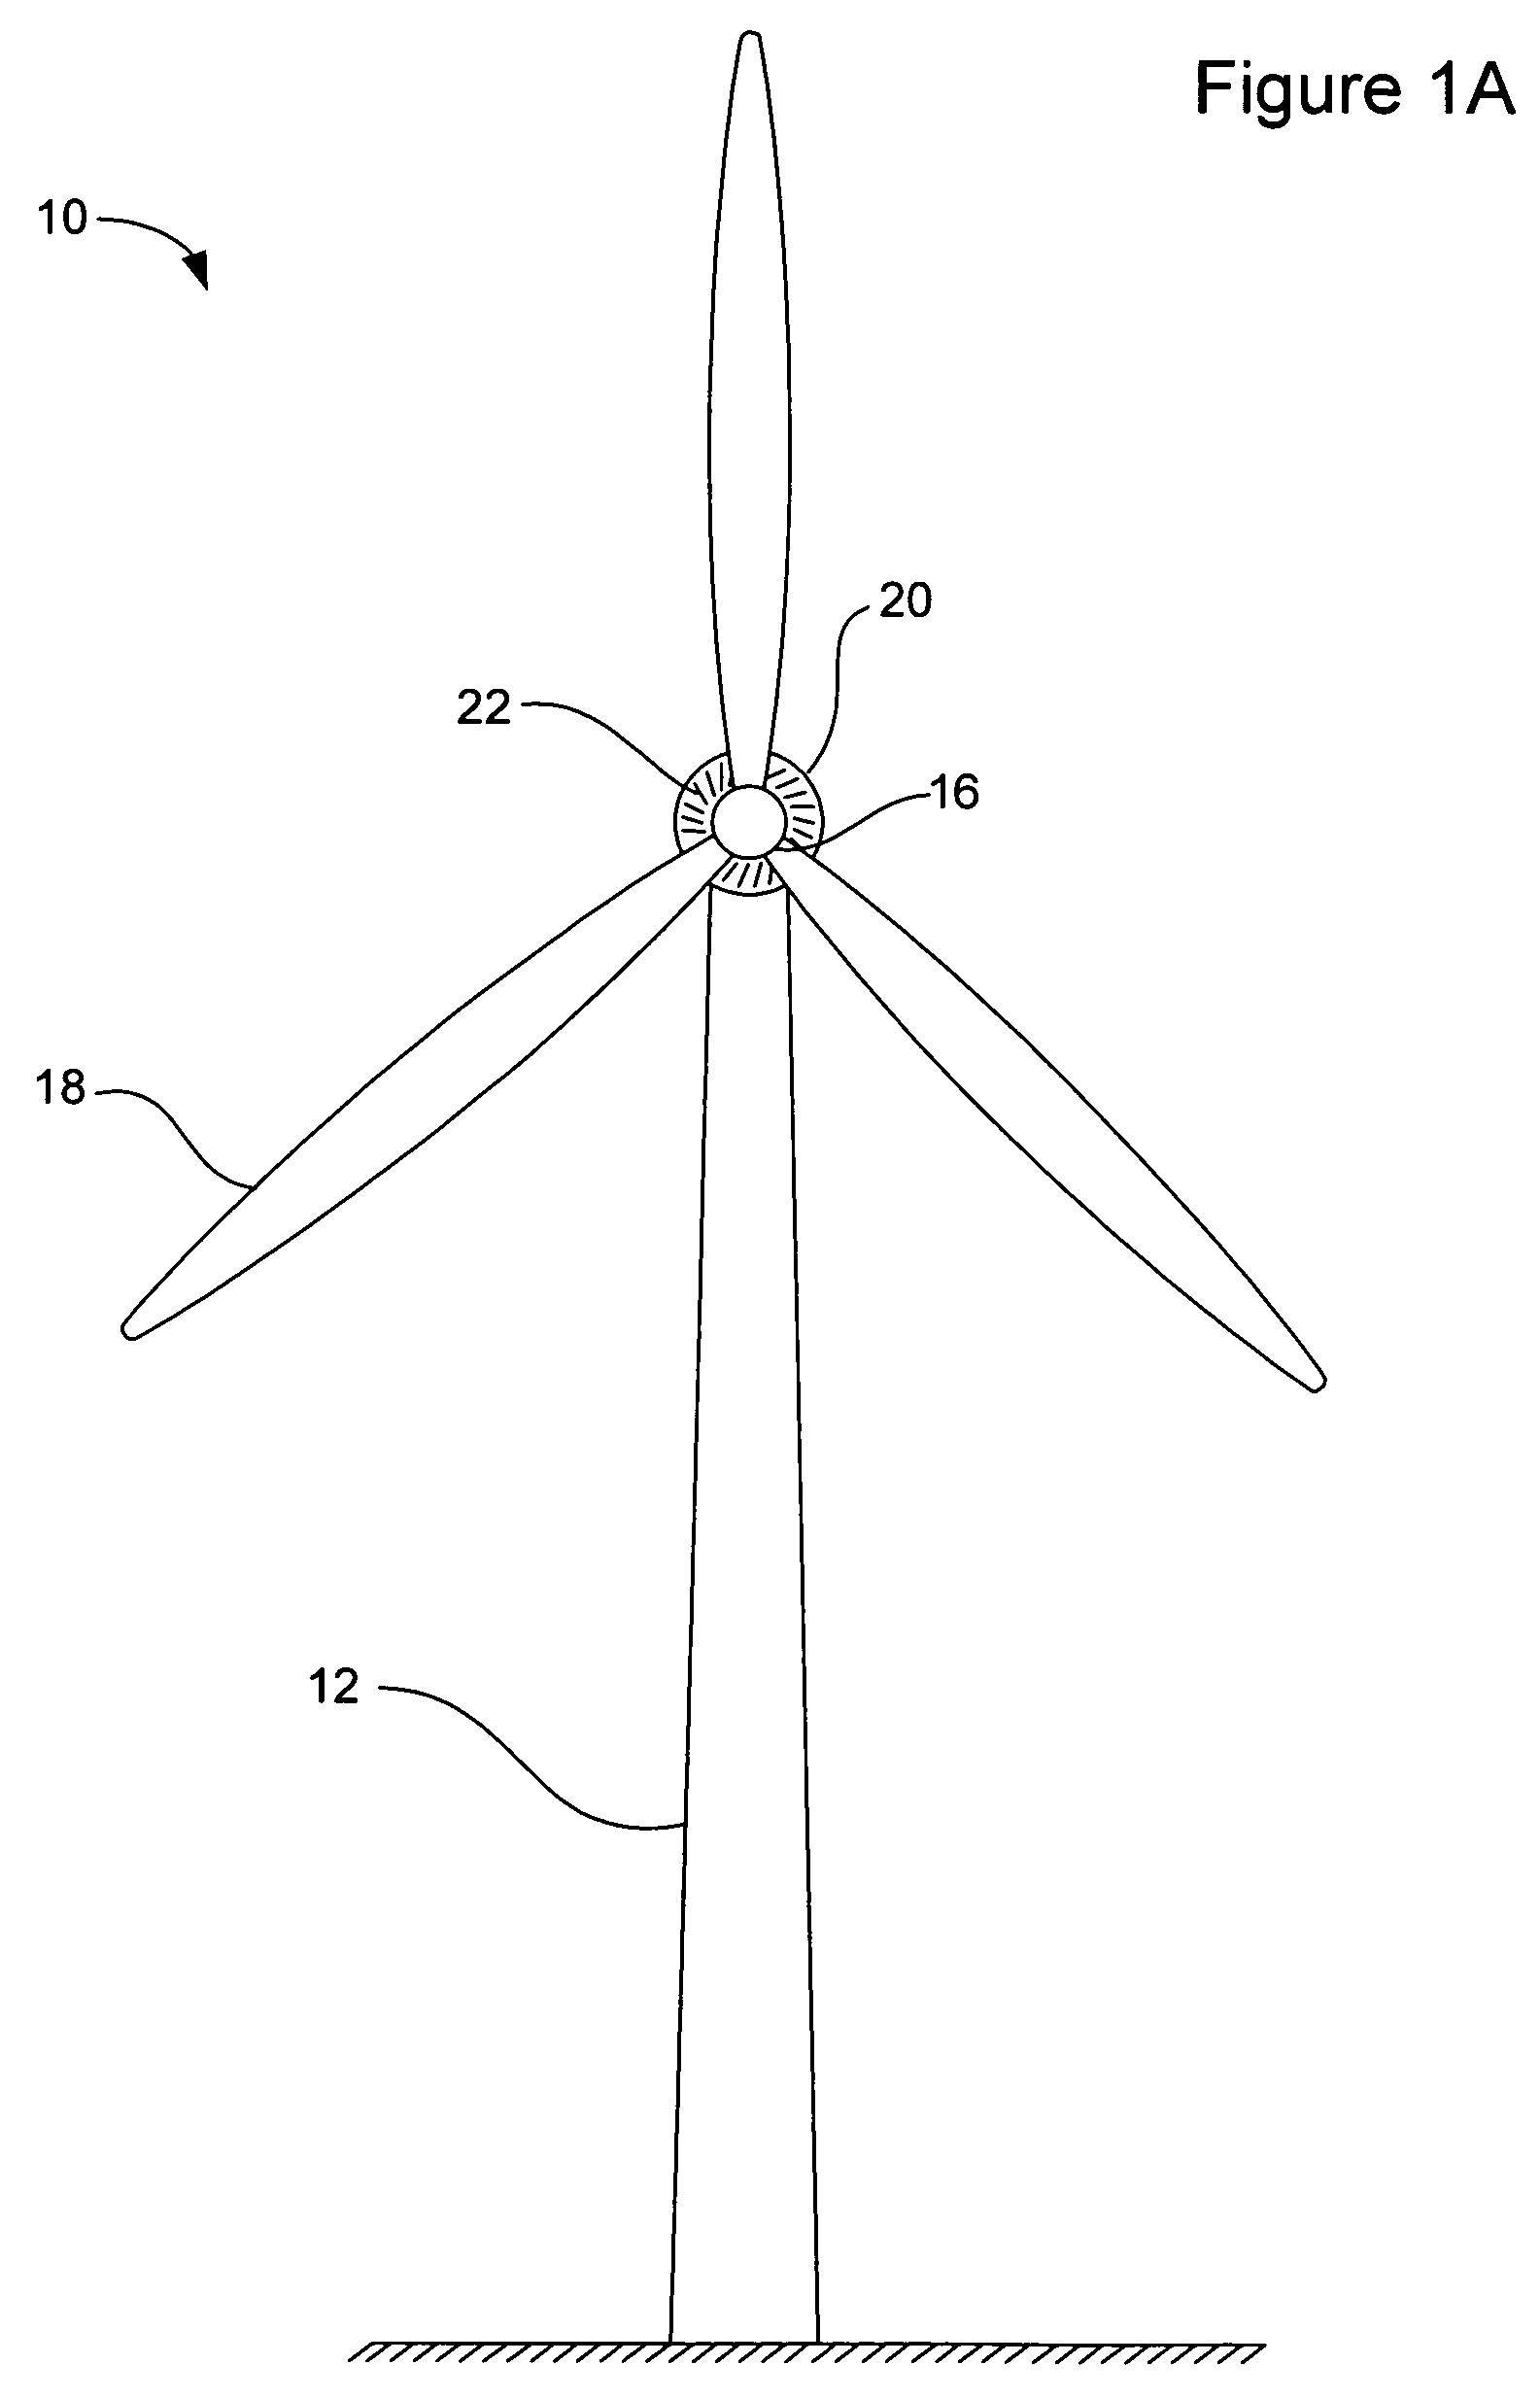 Passively cooled direct drive wind turbine